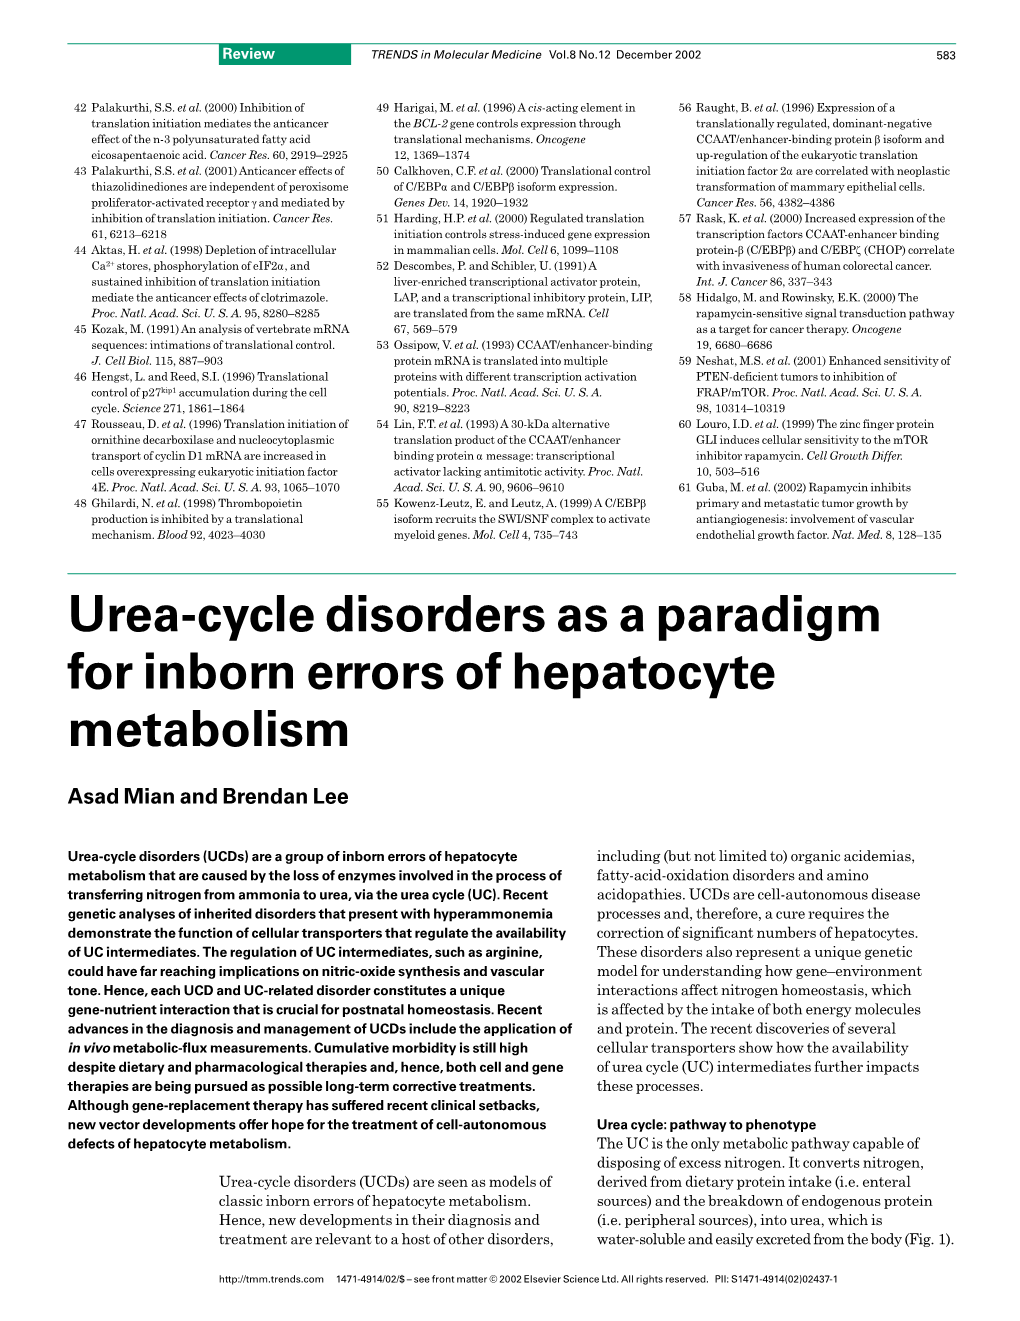 Urea-Cycle Disorders As a Paradigm for Inborn Errors of Hepatocyte Metabolism